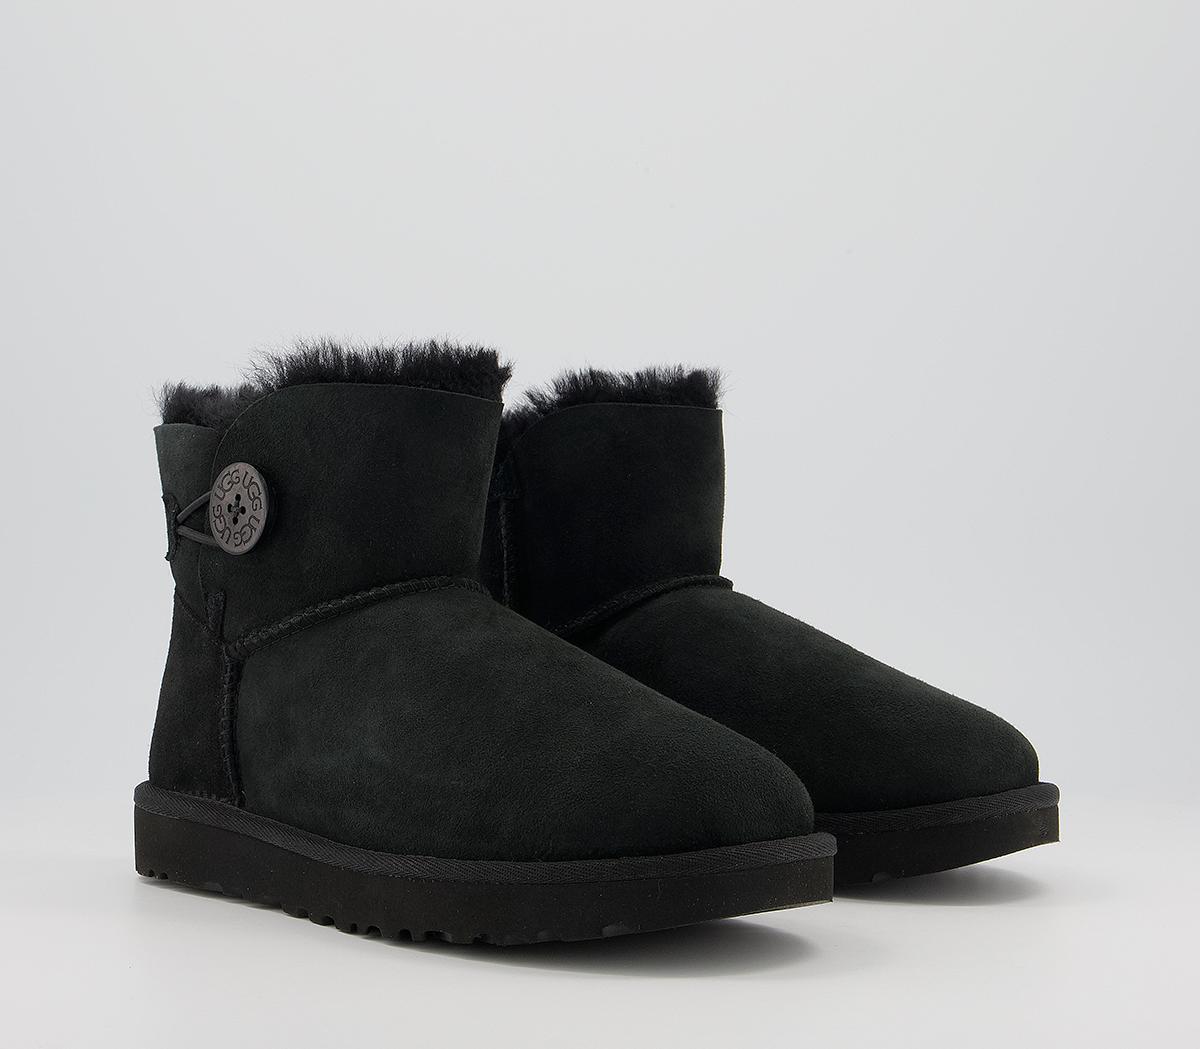 UGG Mini Bailey Button II Boots Black Suede - Women's Ankle Boots